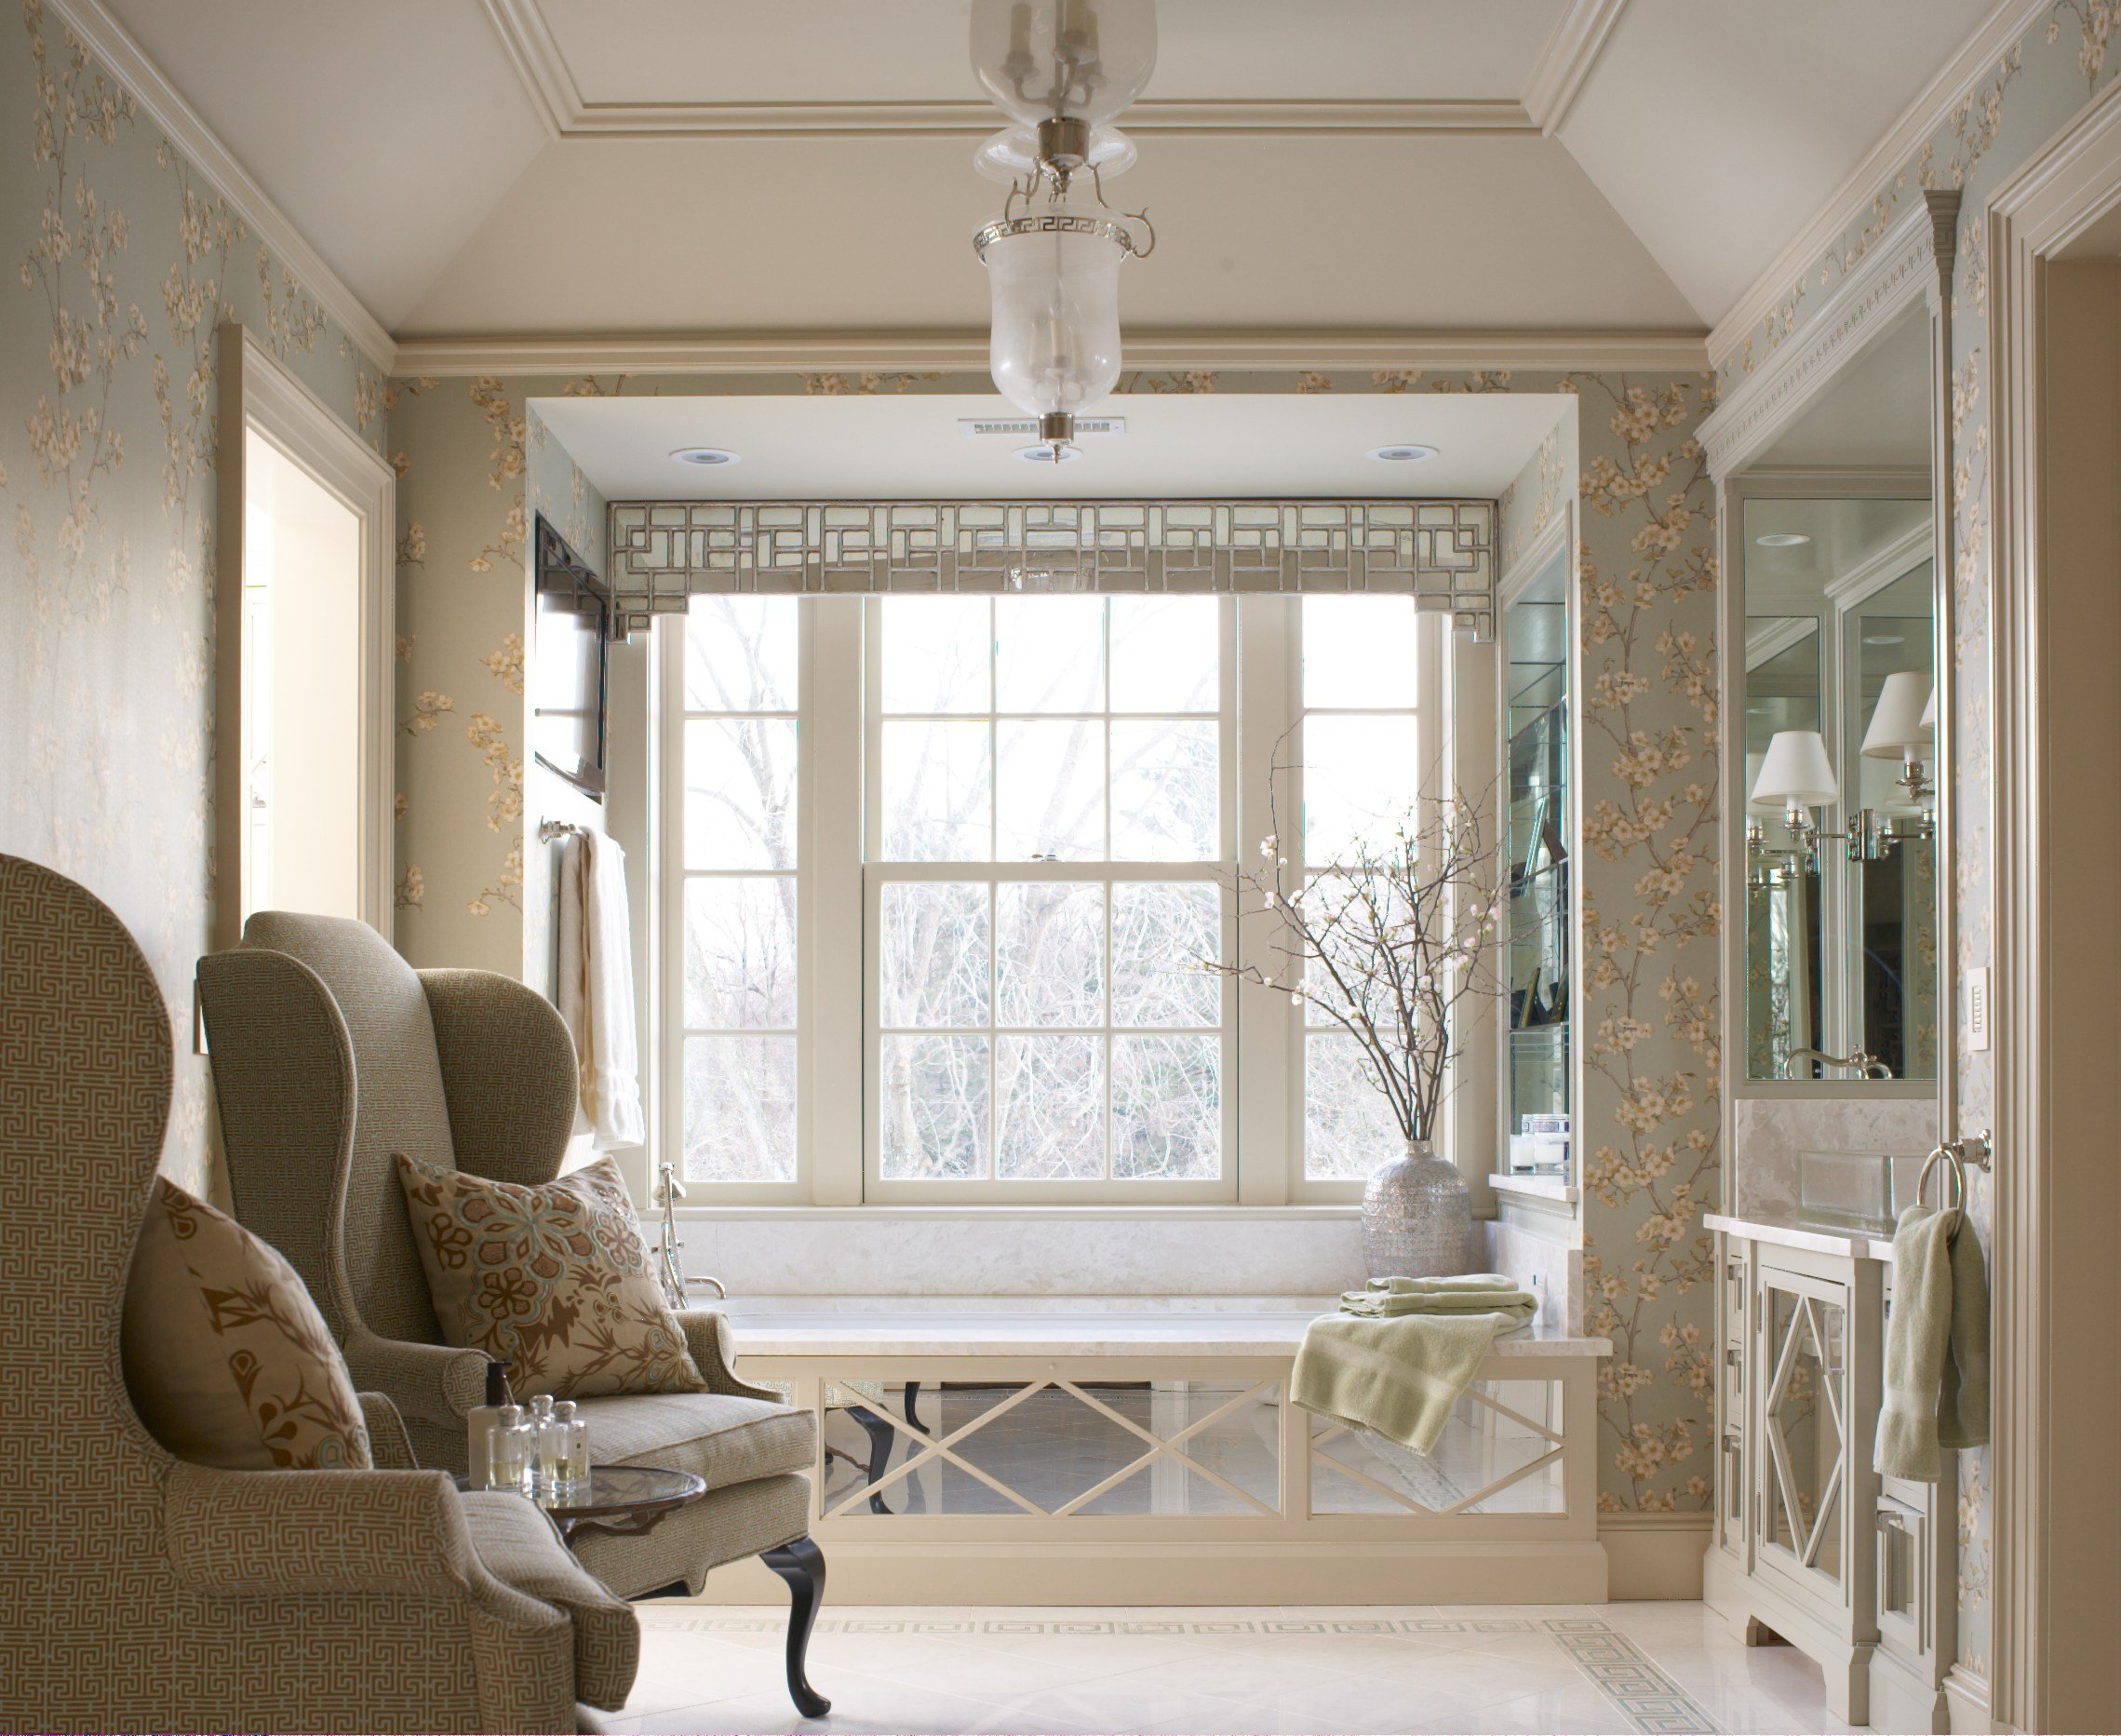 19-sitting-area-window-bench-wallpaper-detail-elegant-transitional-colonial-greenwich-connecticut.jpg